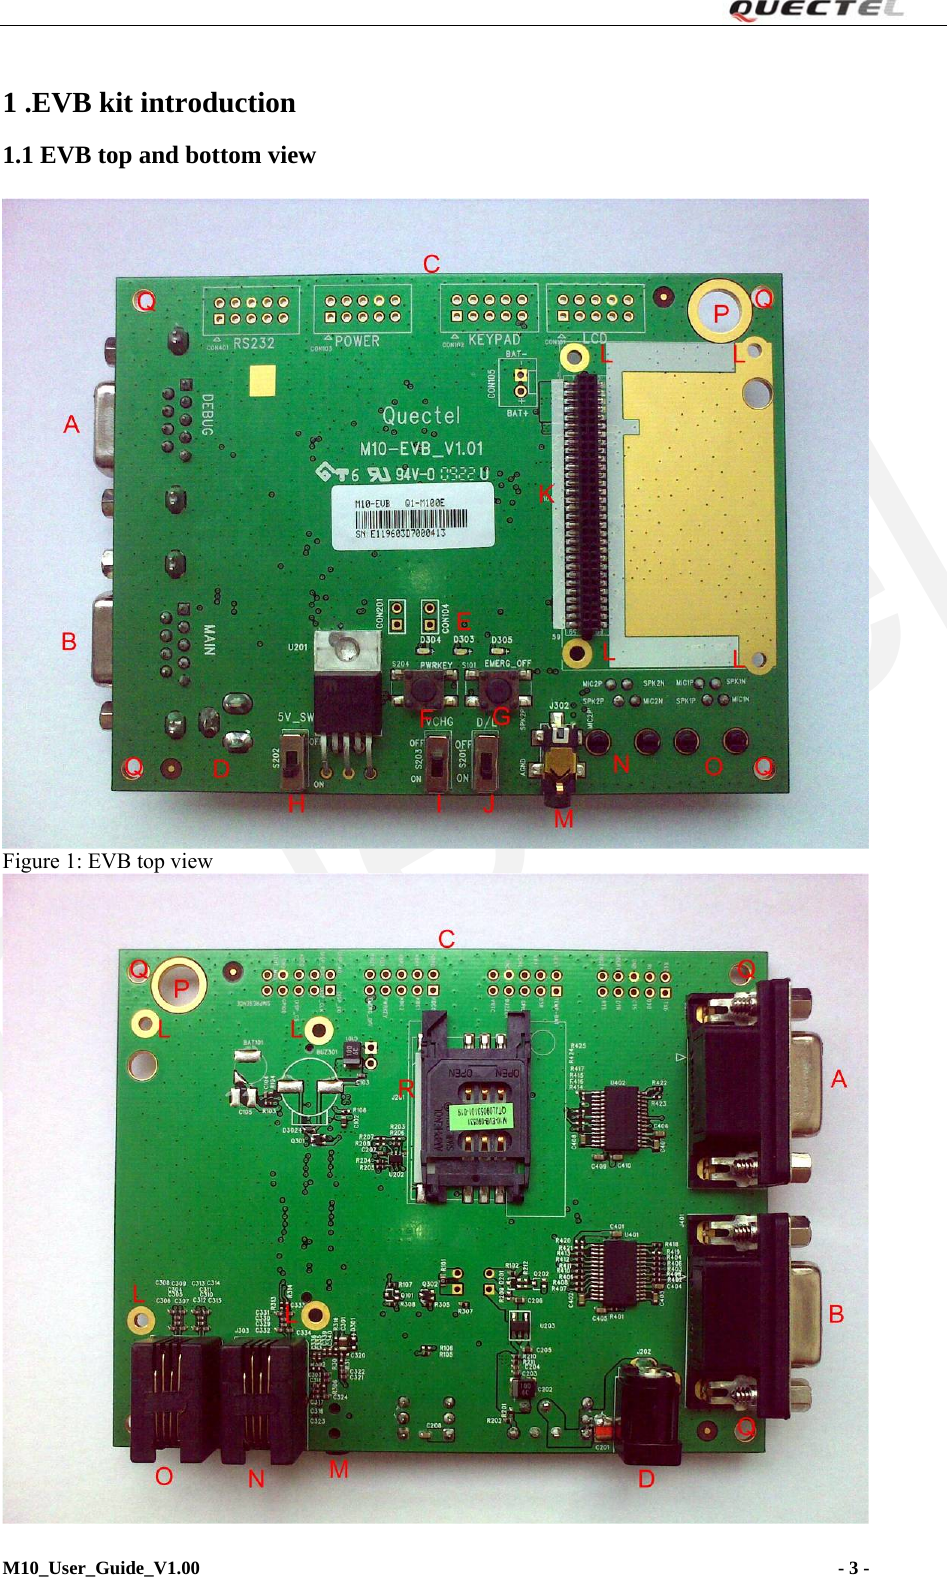 Quectel                                                              1 .EVB kit introduction  1.1 EVB top and bottom view   Figure 1: EVB top view  M10_User_Guide_V1.00                                                                    - 3 -   